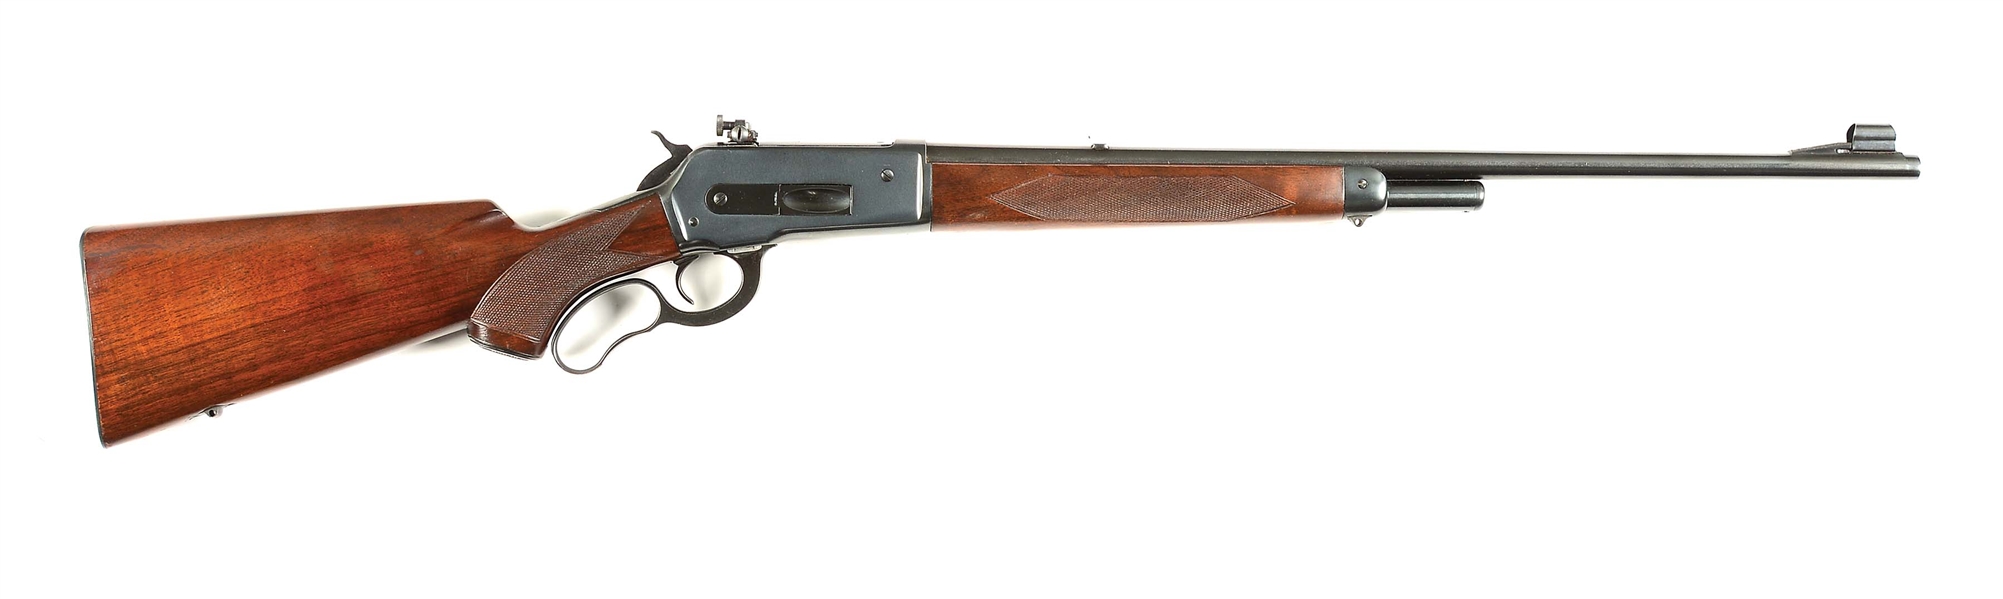 (C) NEAR MINT POST-WAR WINCHESTER DELUXE MODEL 71 LEVER ACTION RIFLE.